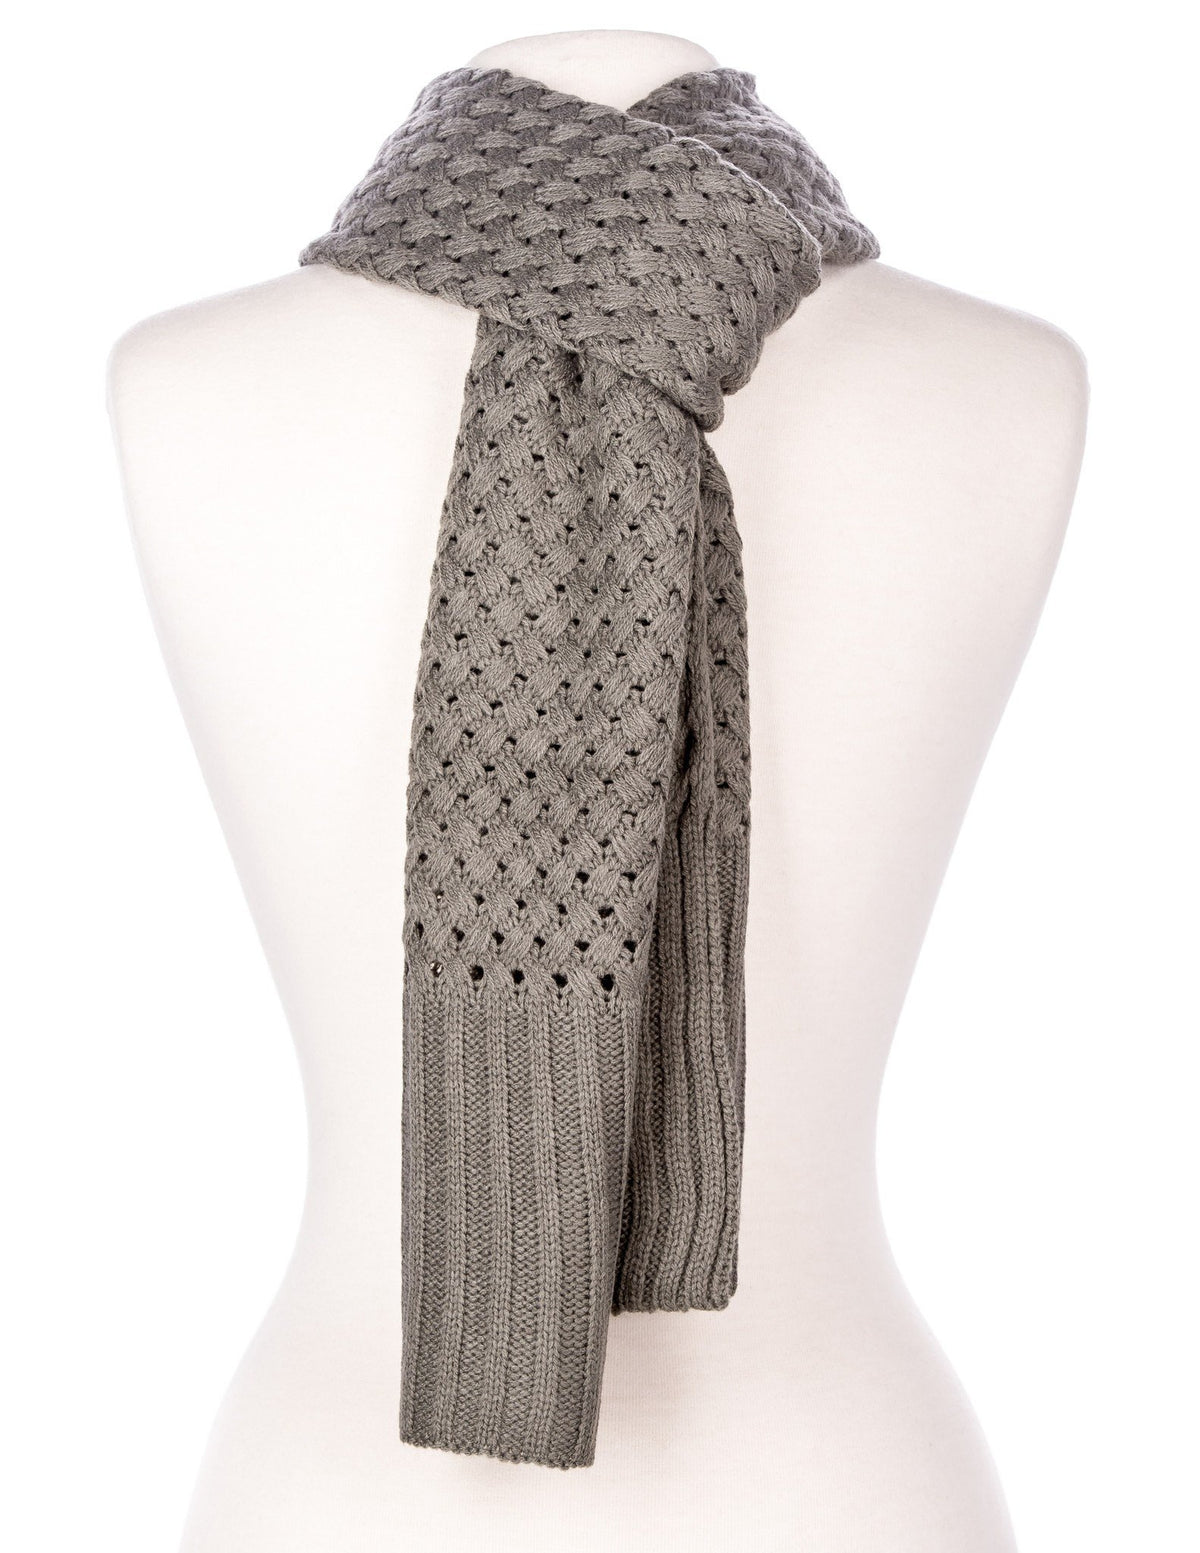 Men's Solid Weave Everyday Winter Scarf - Gray